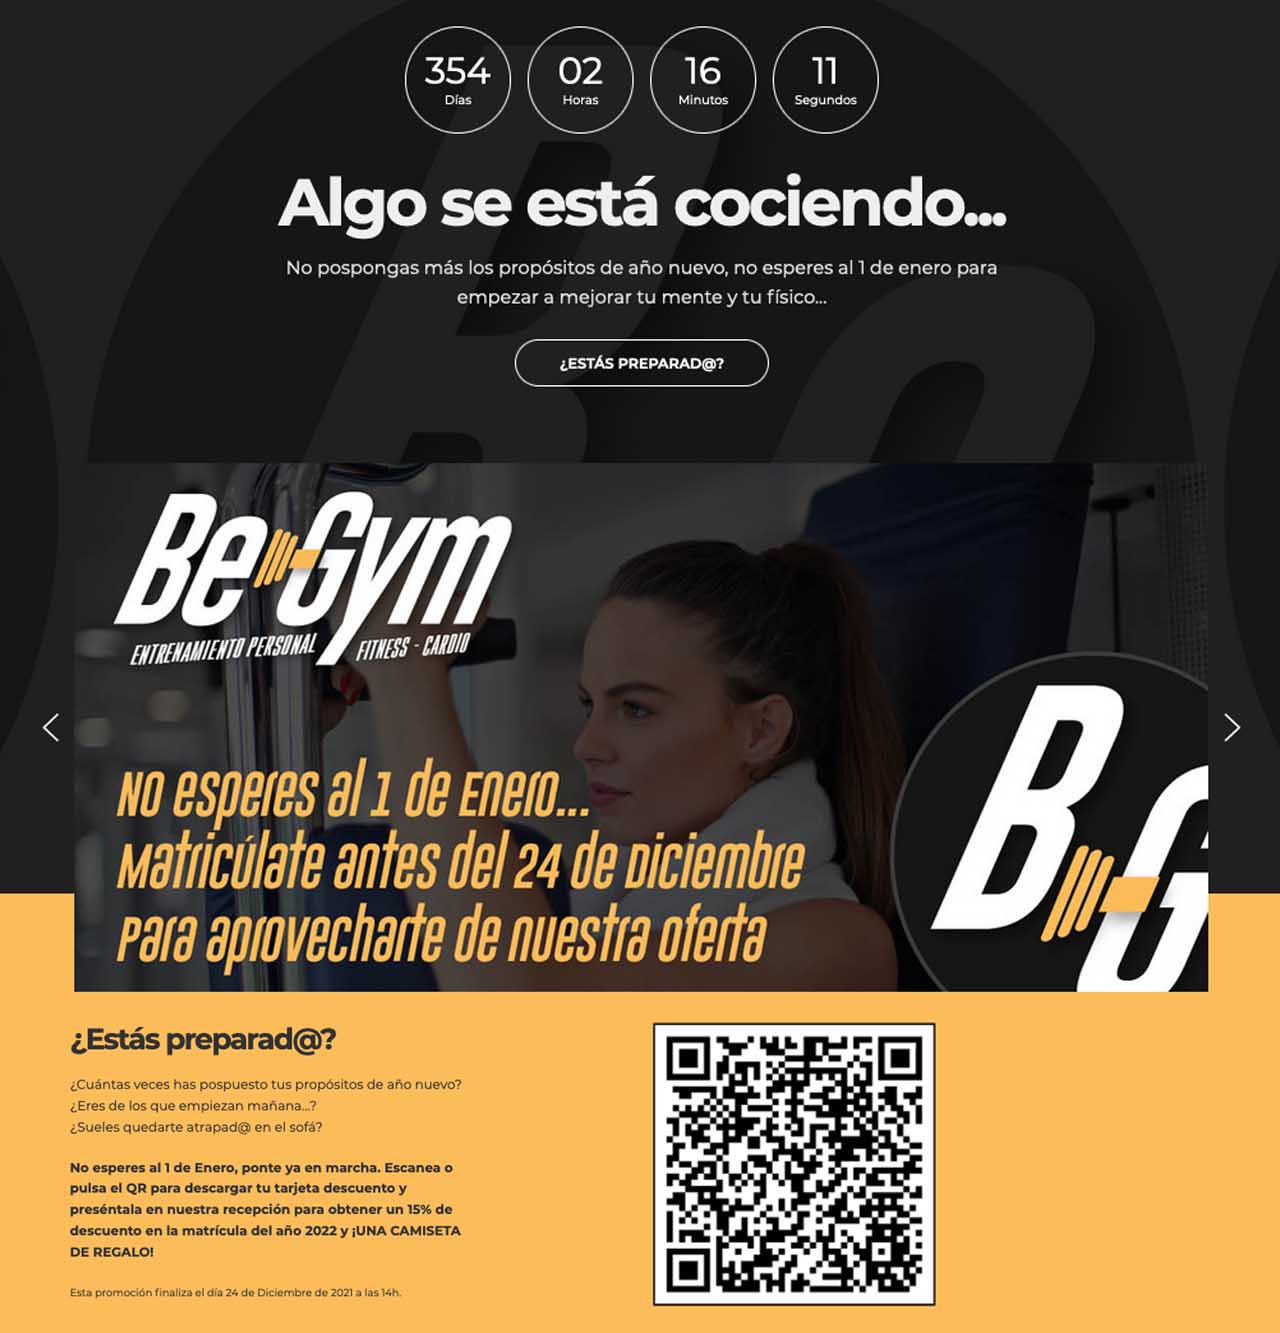 BeGym landing page